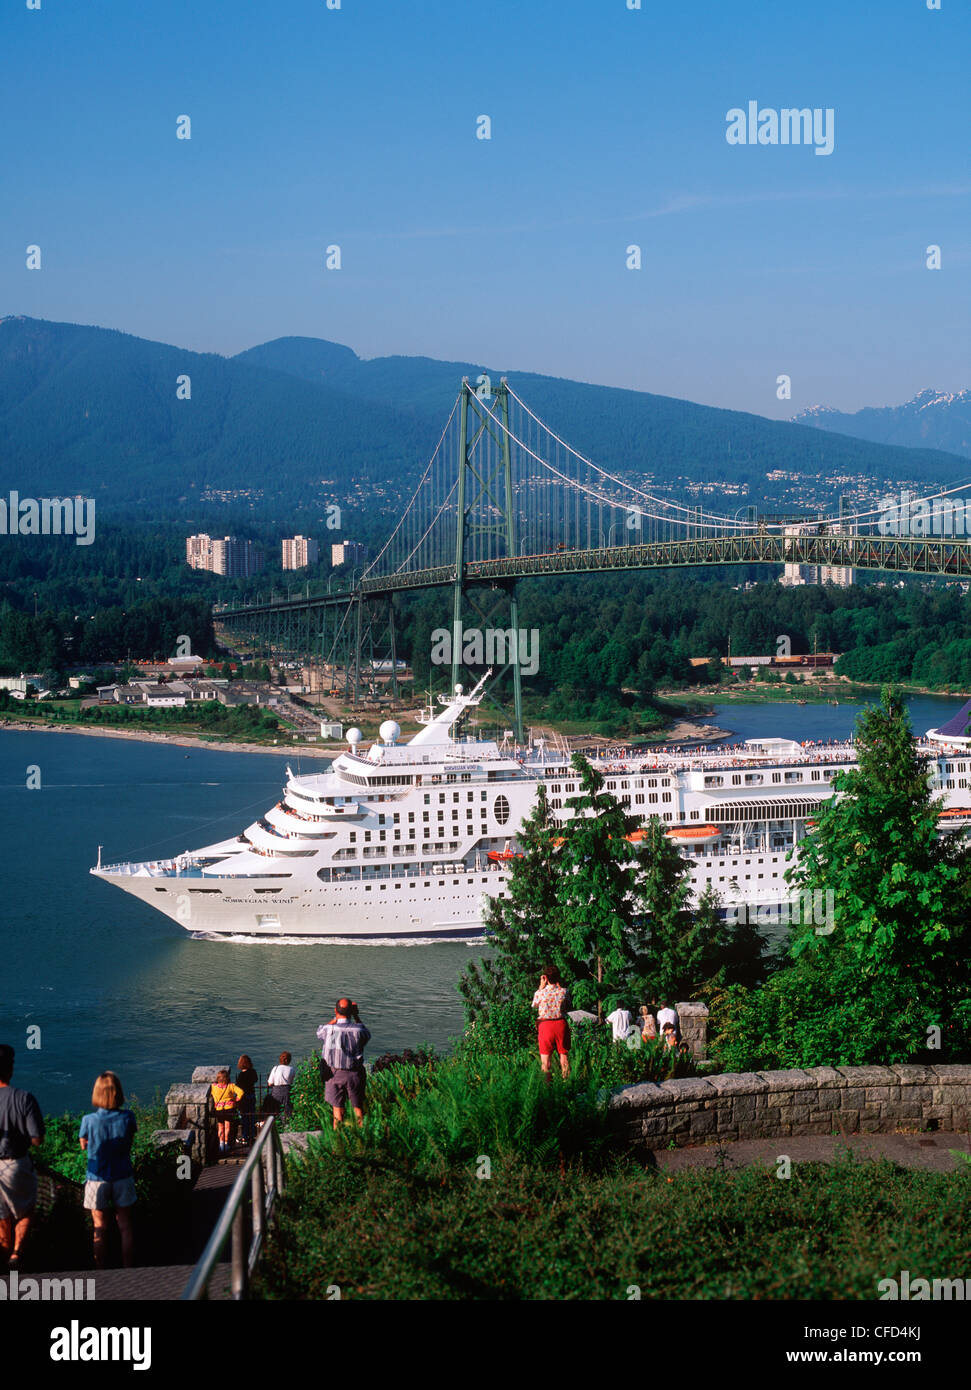 Passenger cruise ship in the Burrard Inlet passing under the Lions Gate Bridge, Vancouver, British Columbia, Canada. Stock Photo